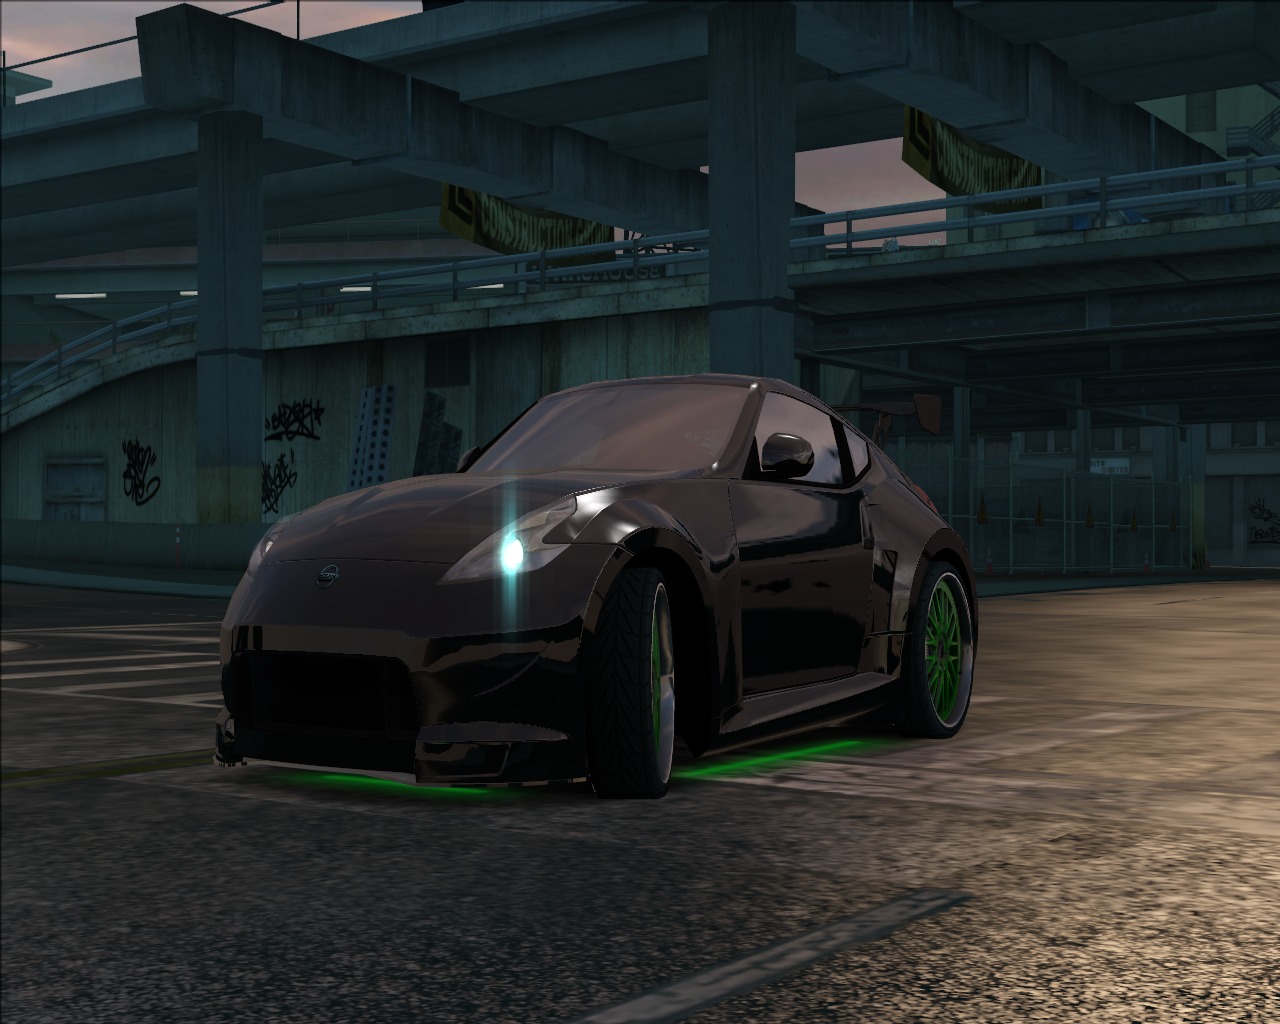 Nfs mods cars. NFS андерковер. Cadillac CTS NFS. Need for Speed Underground 2 Lexus. Need for Speed Underground 2 Remastered.